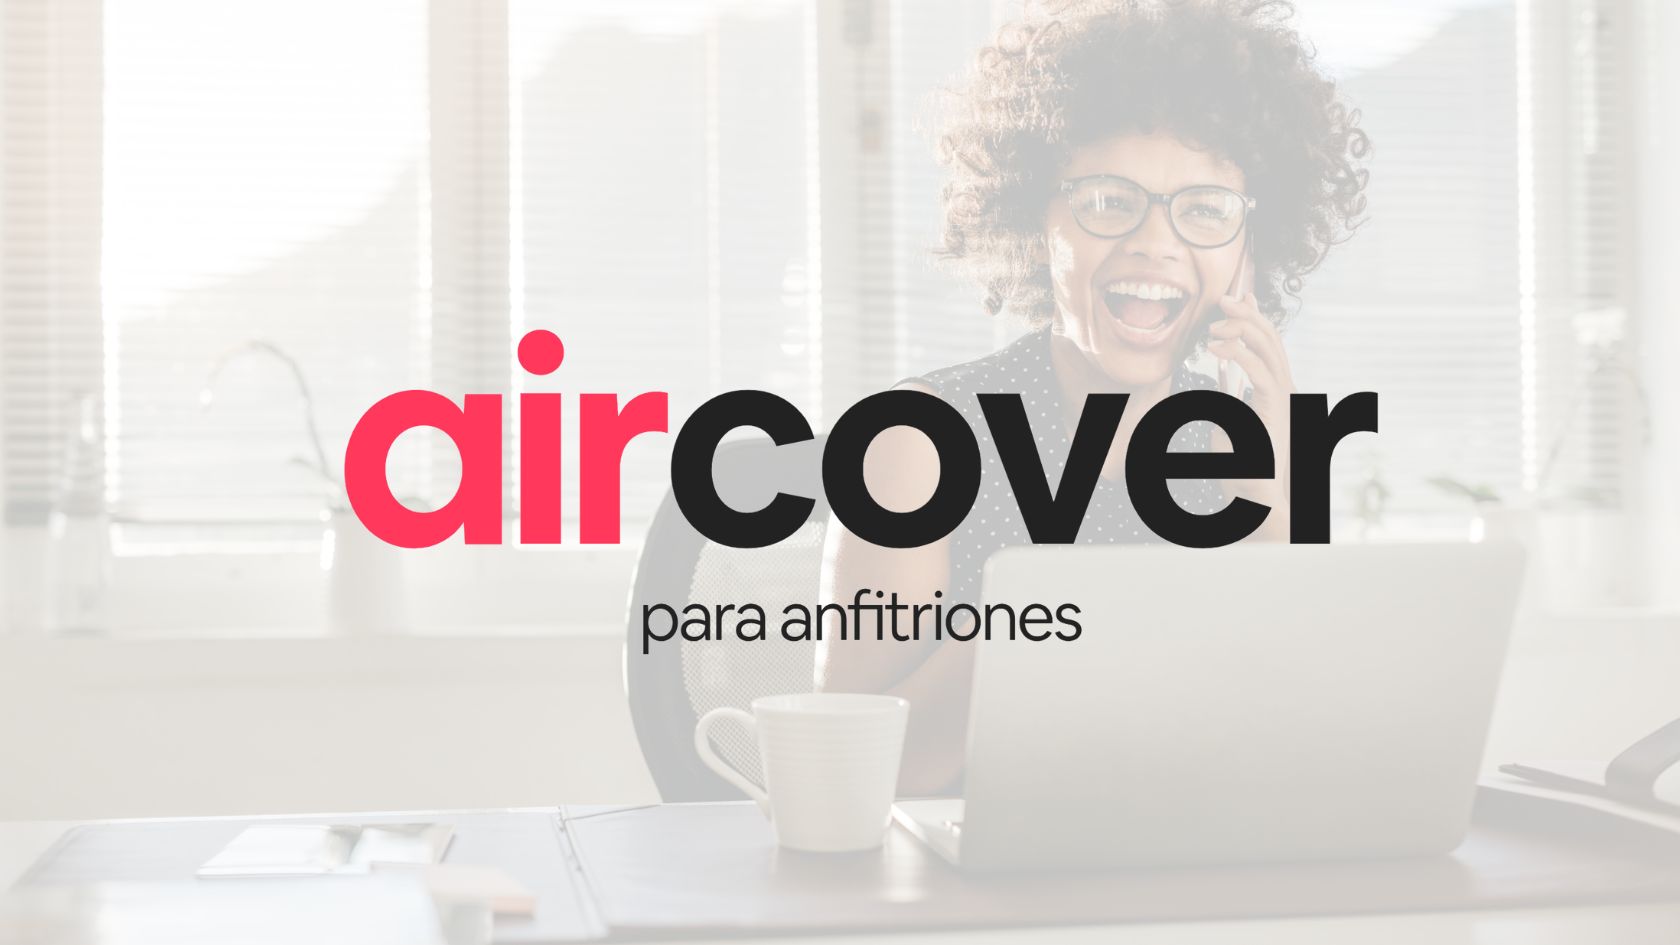 aircover anfitriones airbnb